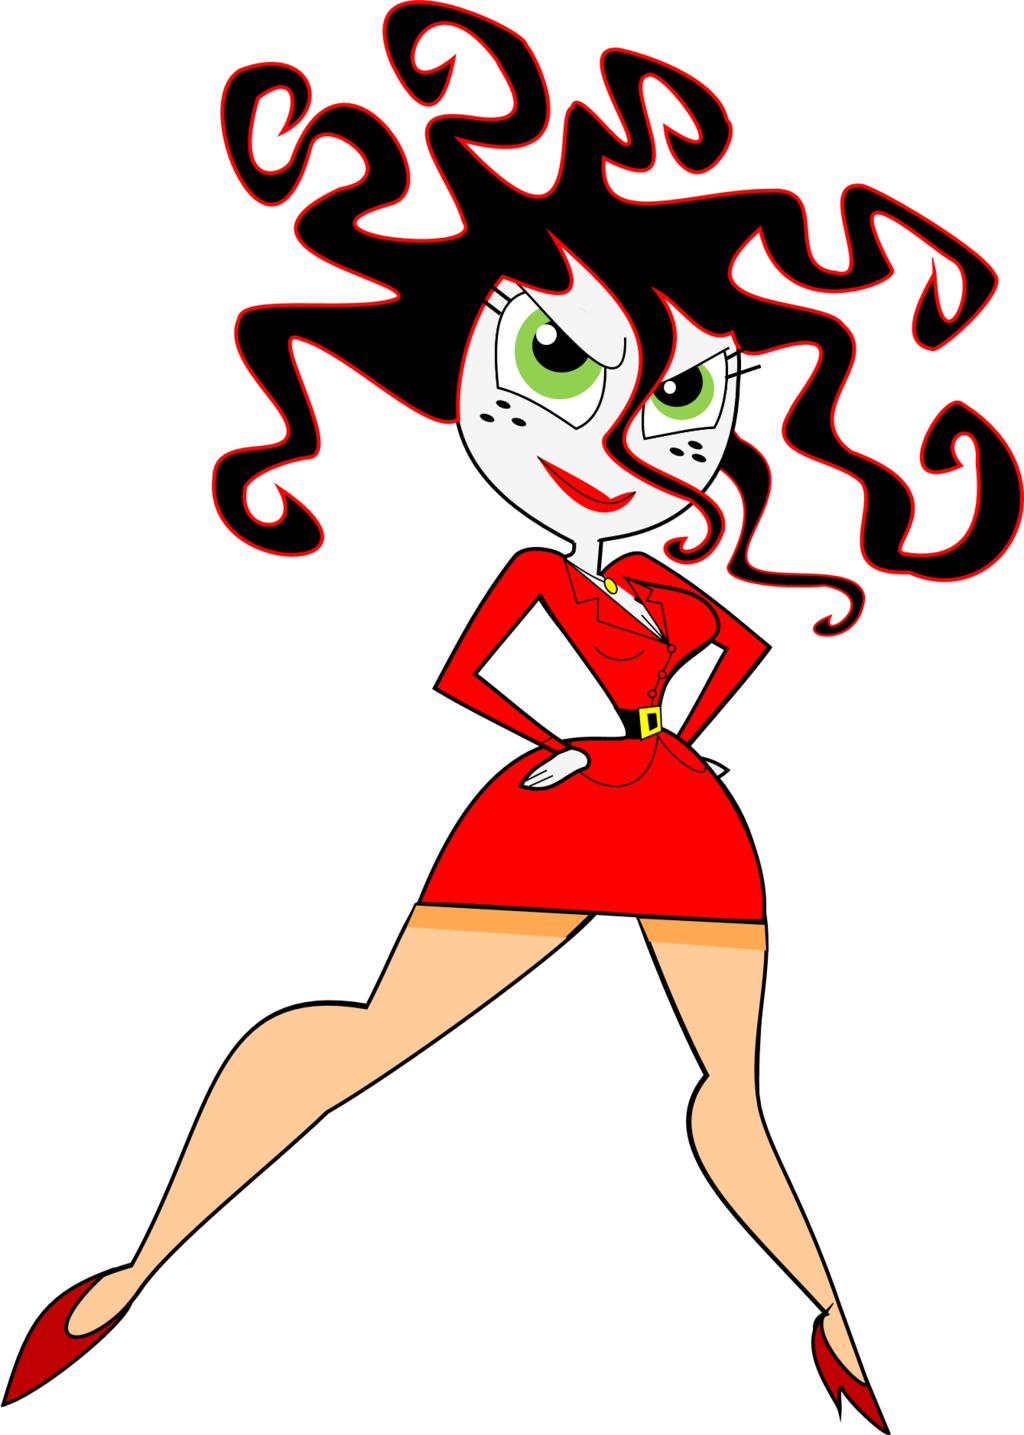 Download and share clipart about Miss Sara Bellum Art Female Princess Morbu...